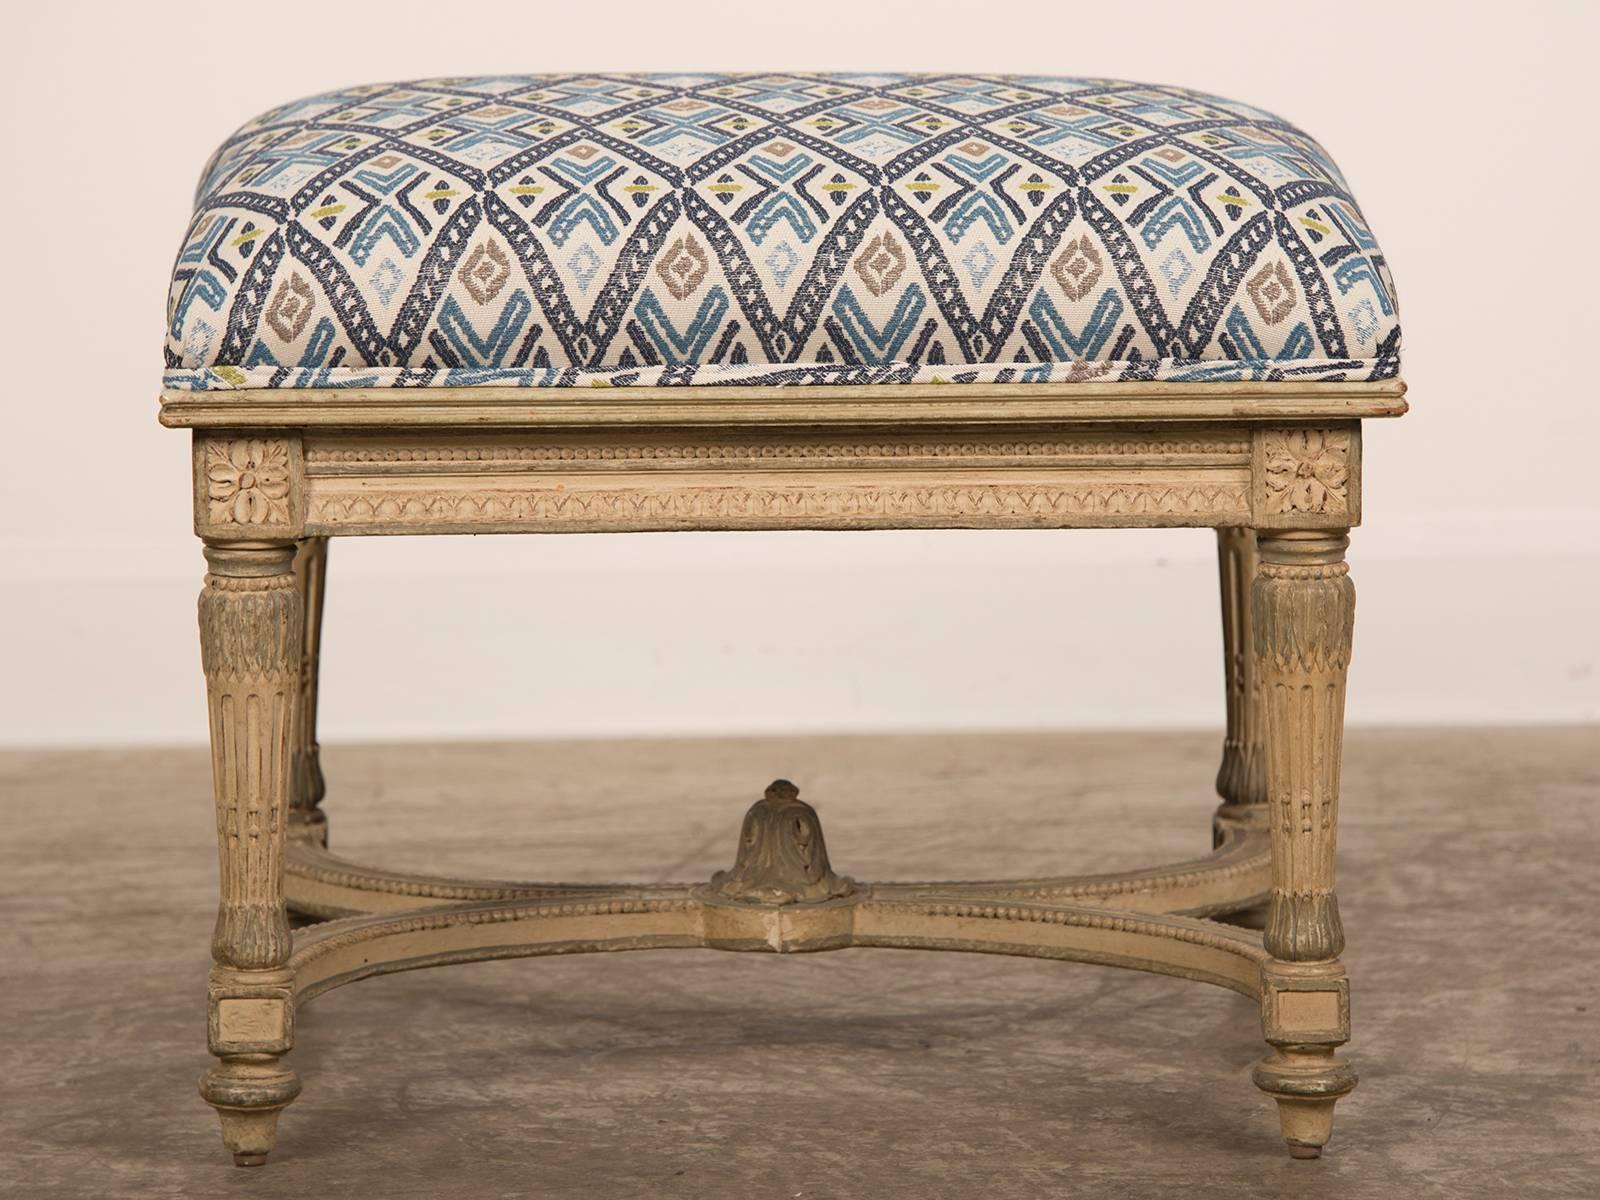 Louis XVI style painted bench, Belle Époque period, France, circa 1890. The handsome carved details on this bench appear not only on each of the four legs but also across the double 